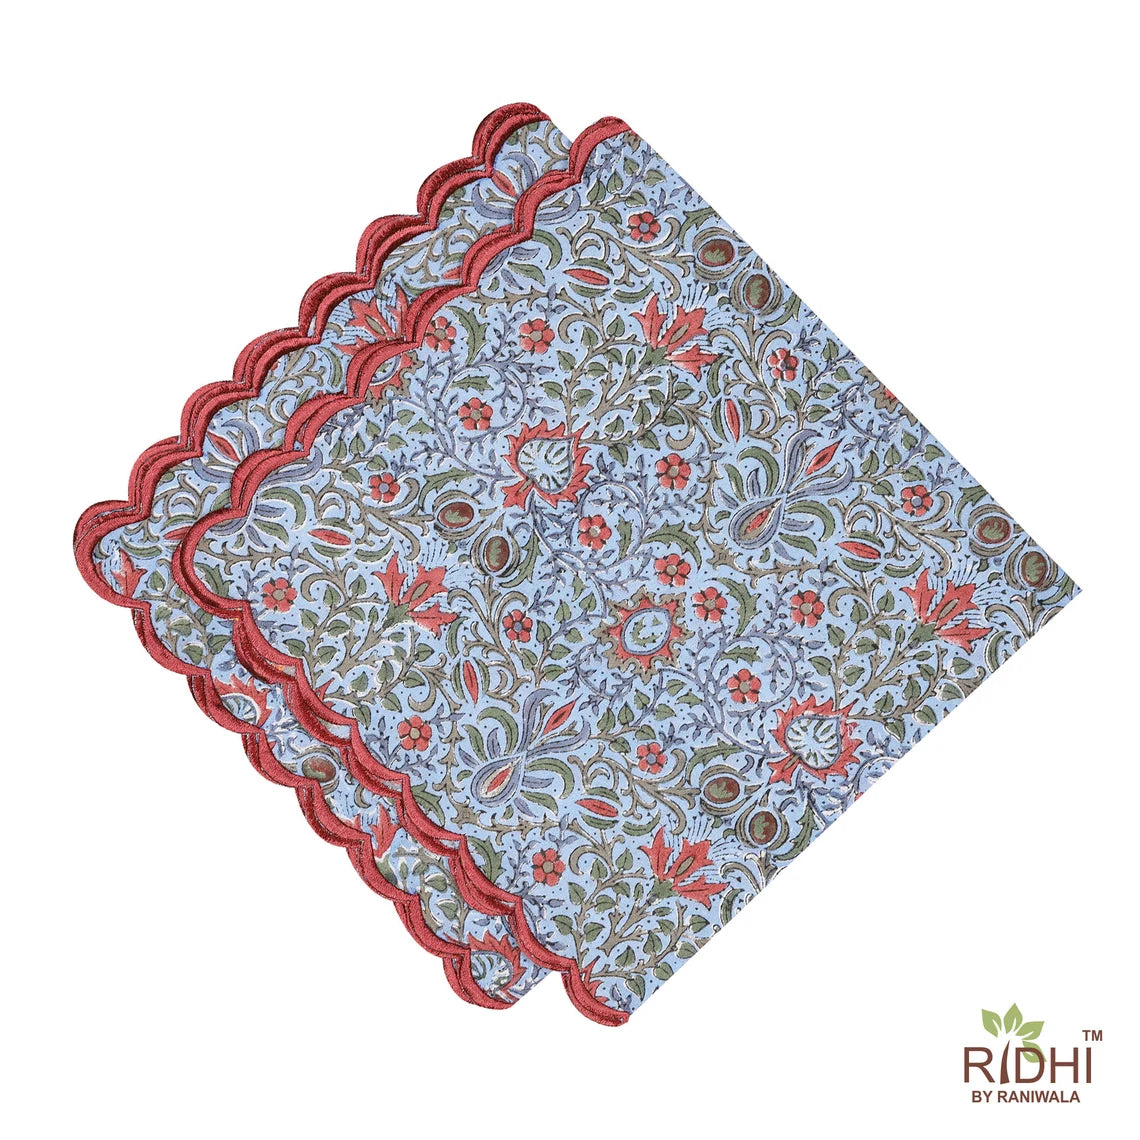 Airforce Blue, Army Green, Sangria Red Indian Floral Hand Block Printed Cotton Cloth Napkins, 9x9"- Cocktail Napkins, 20x20"- Dinner Napkins